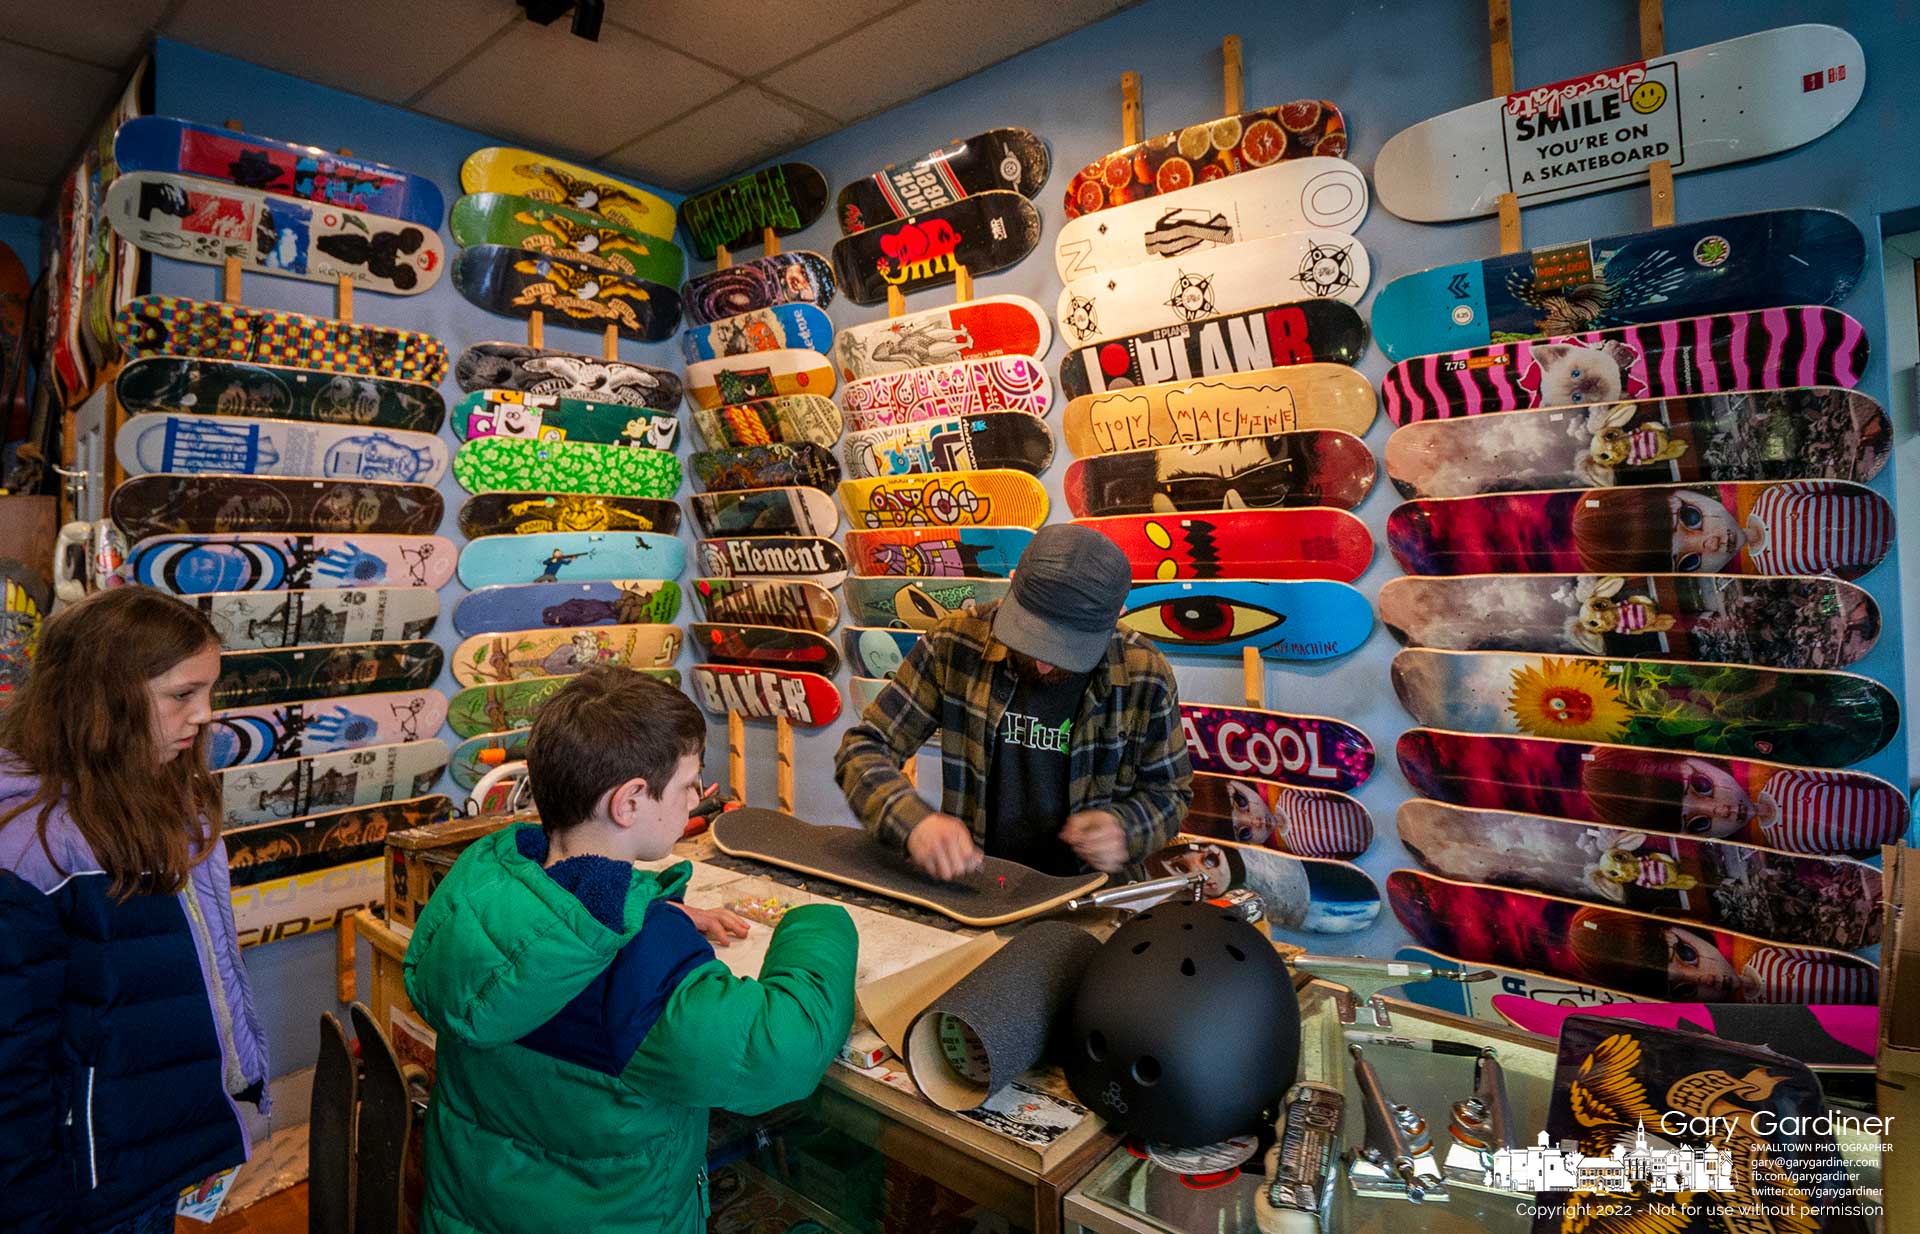 A brother and sister watch as their new skateboards are built after selecting them from the wall of boards at Old Skool Skate Shop in Uptown Westerville. My Final Photo for April 9, 2022.